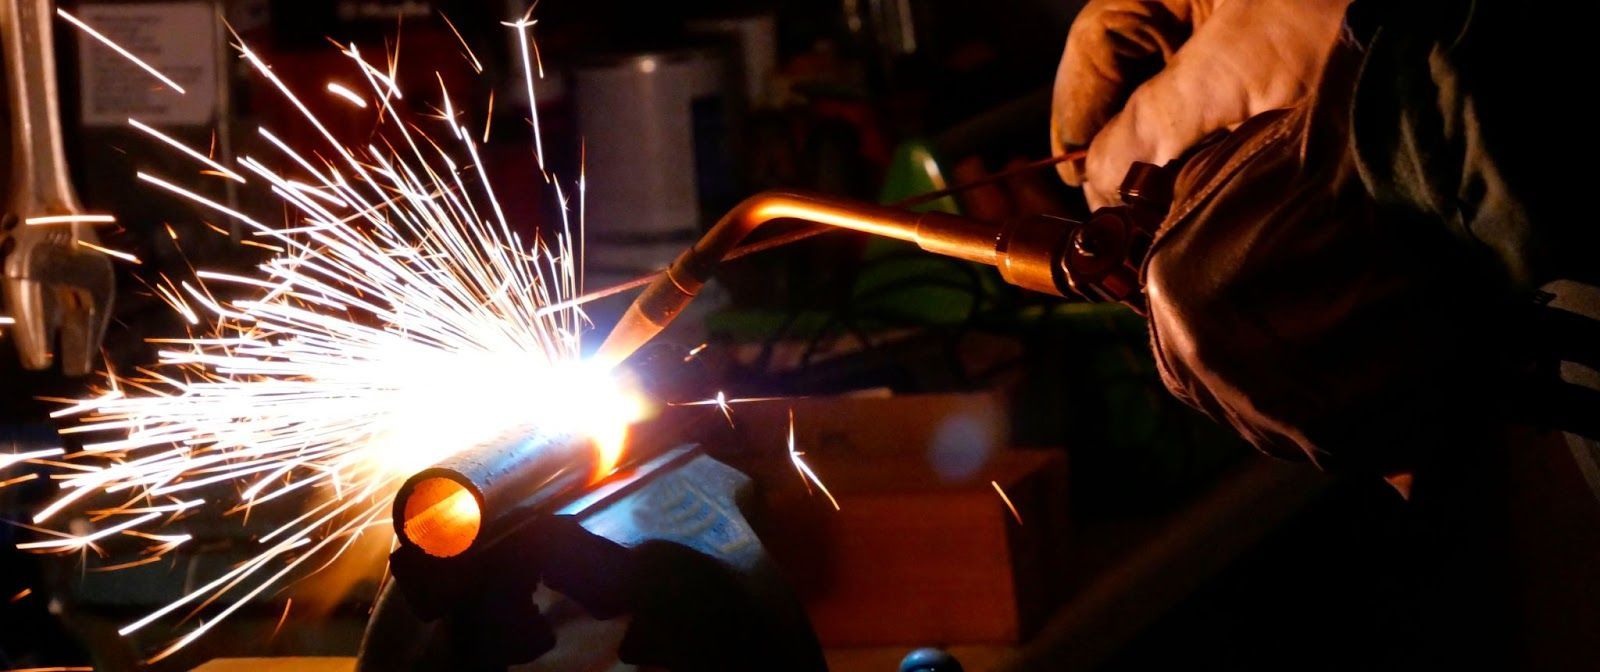 Highest Temperature Can Be Found In Welding